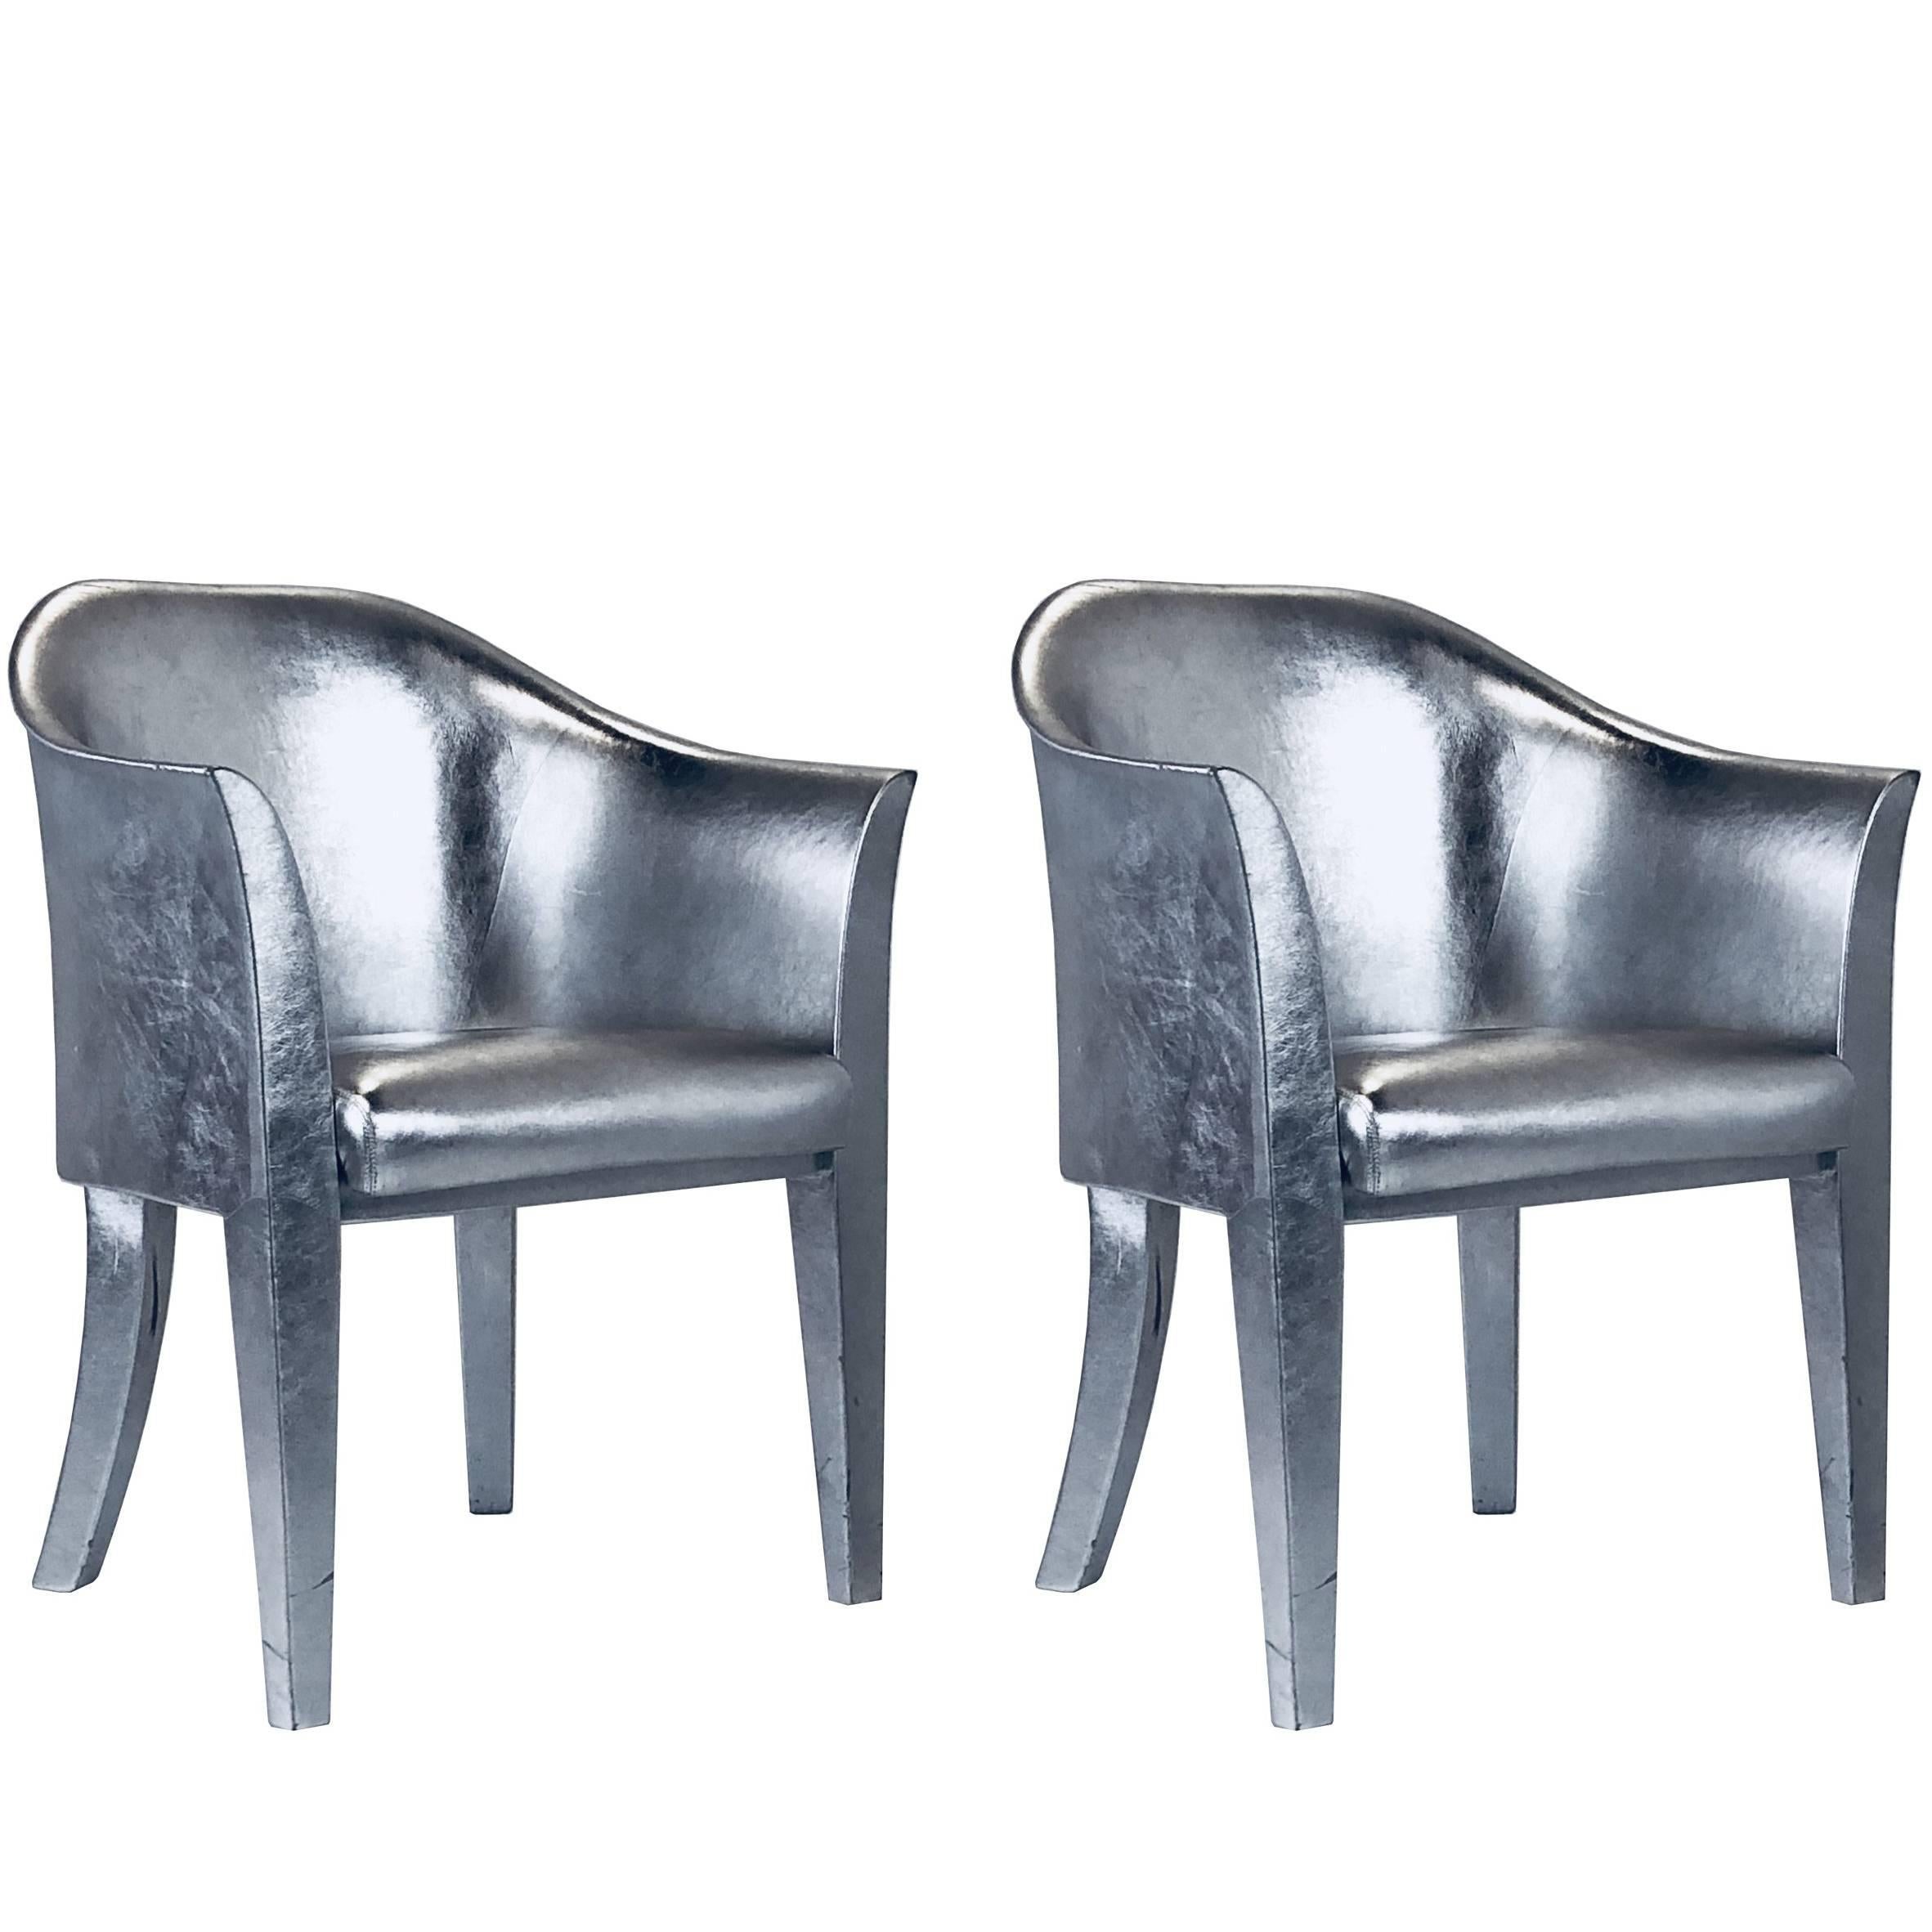 Pair of Metallic Silver Leather Armchairs Signed Karl Springer